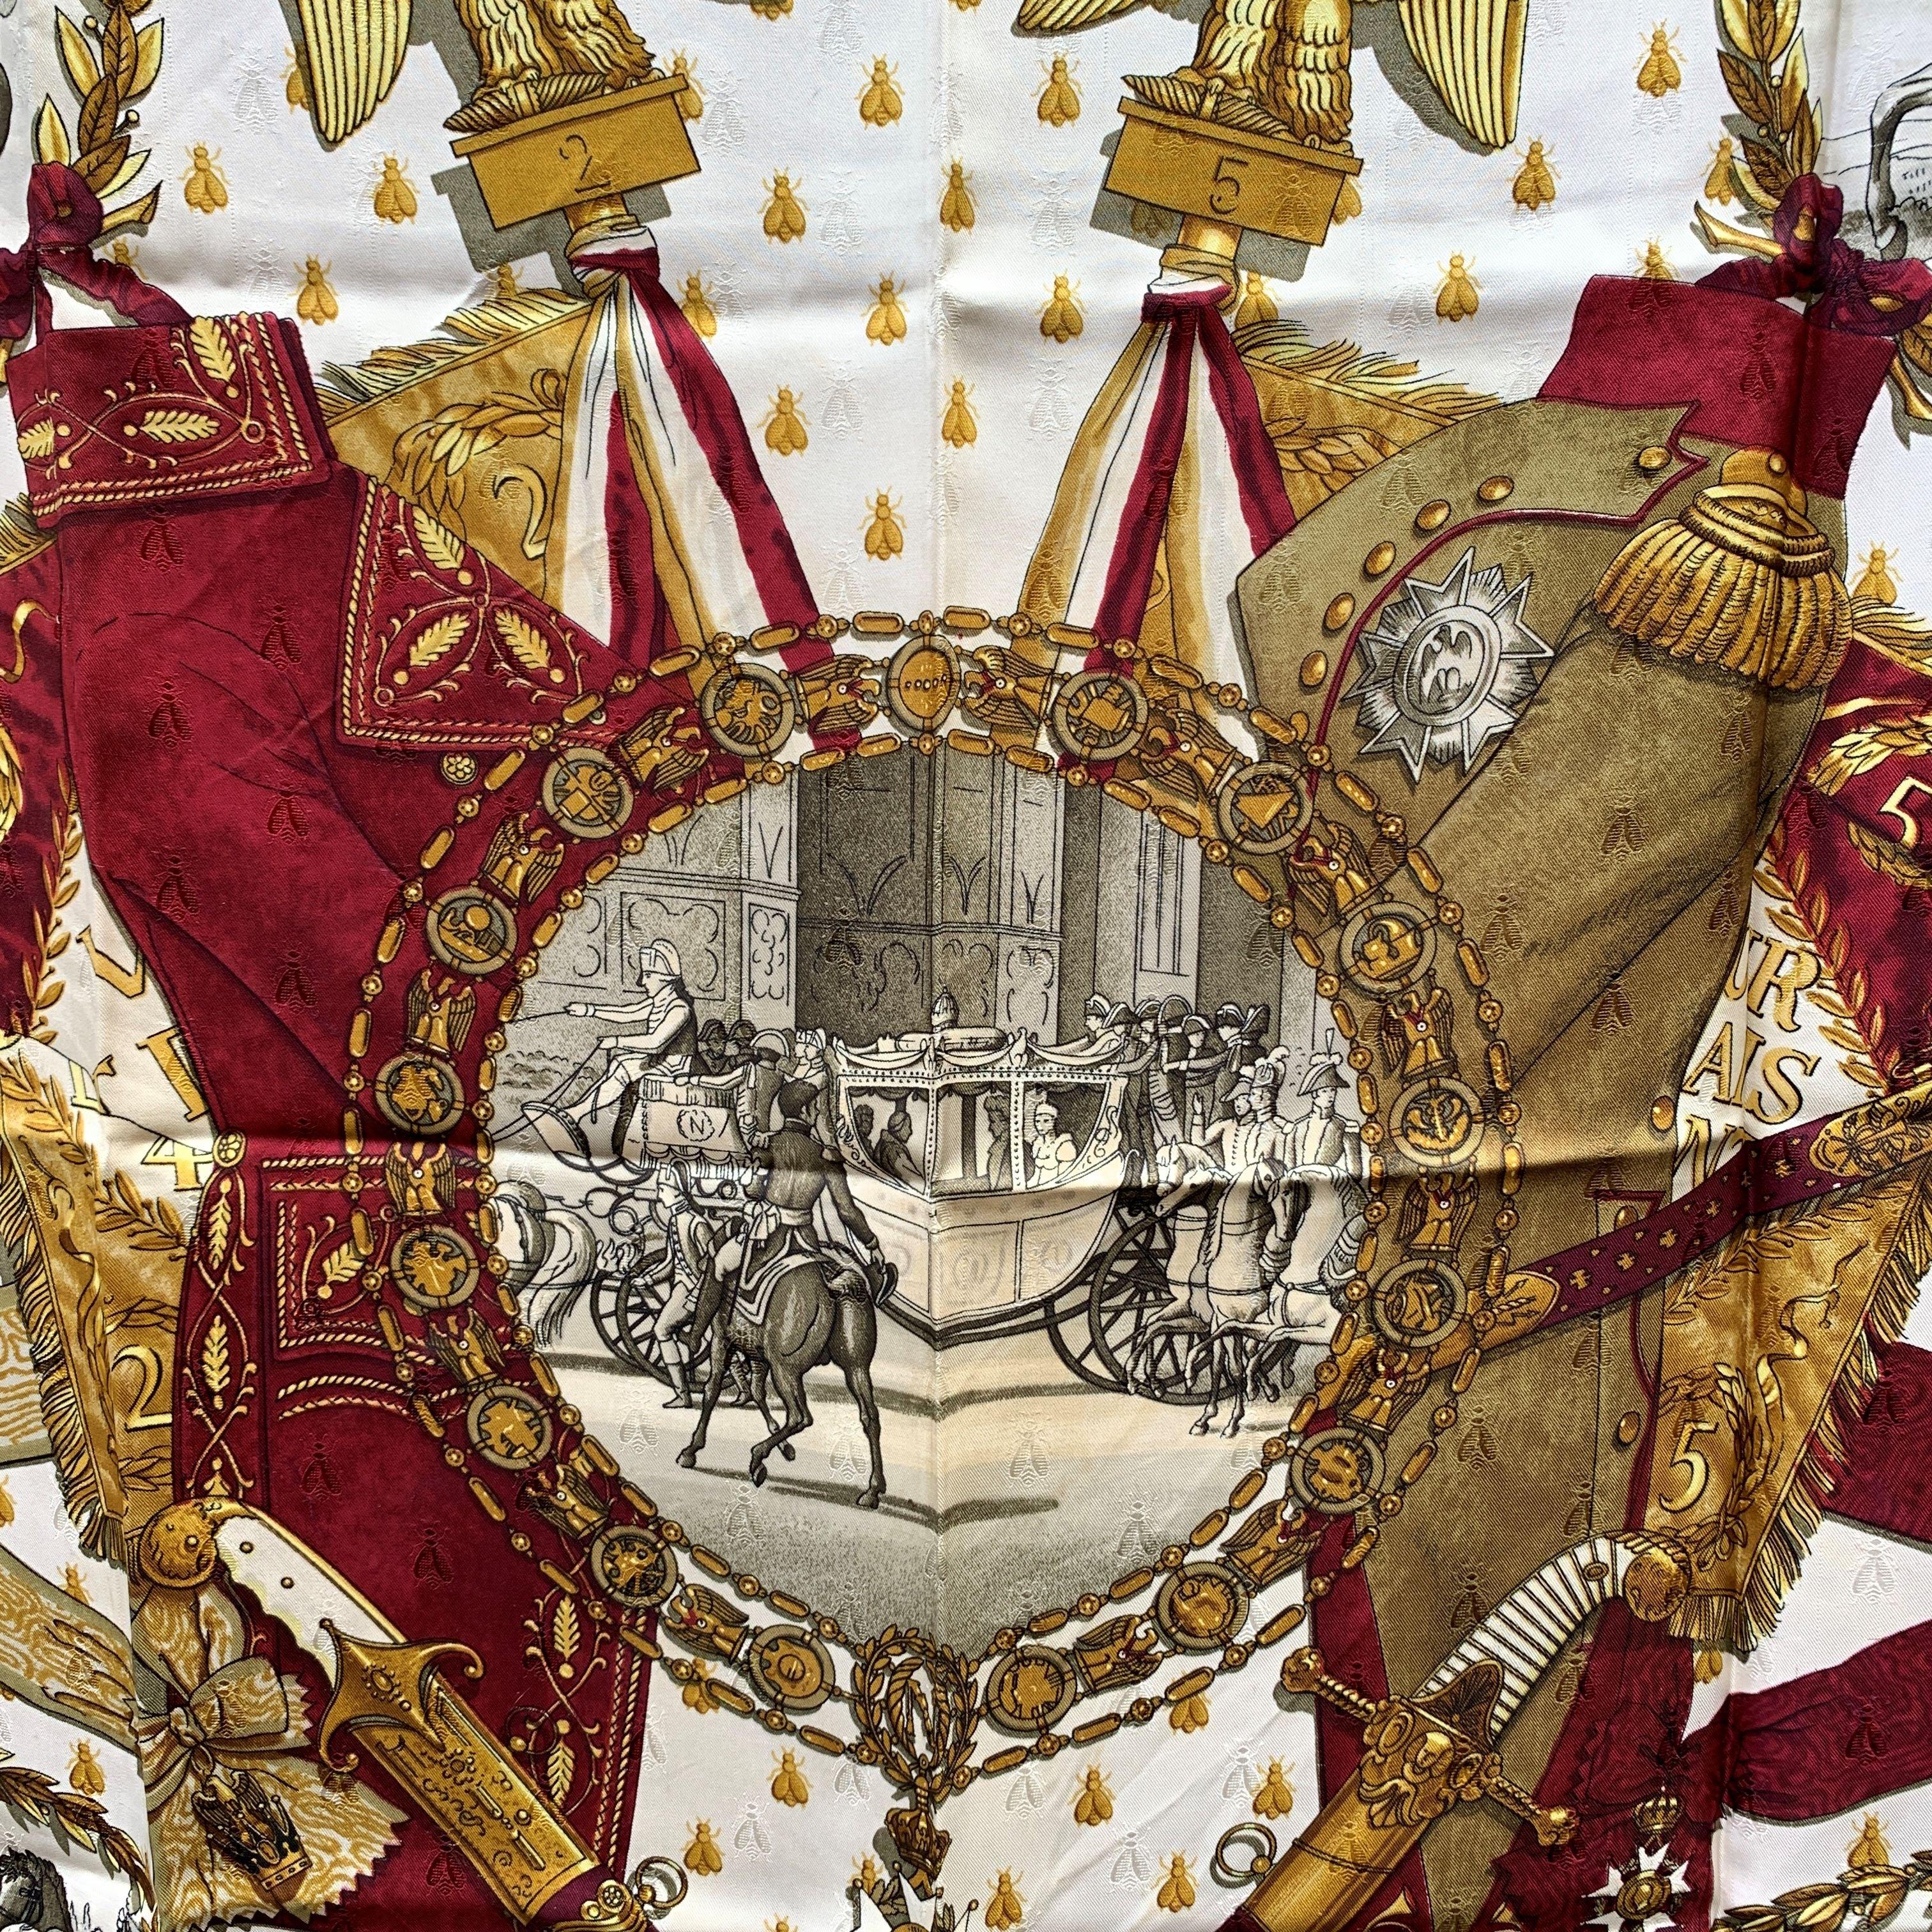 Stunning Hermes 'NAPOLEON' silk scarf designed by Philippe Ledoux and originally issued in 1963. At the centre, there is a depiction of the arrival at the coronation ceremony in Notre-Dame on 2 December, 1804 (taken from an engraving in the Livre du